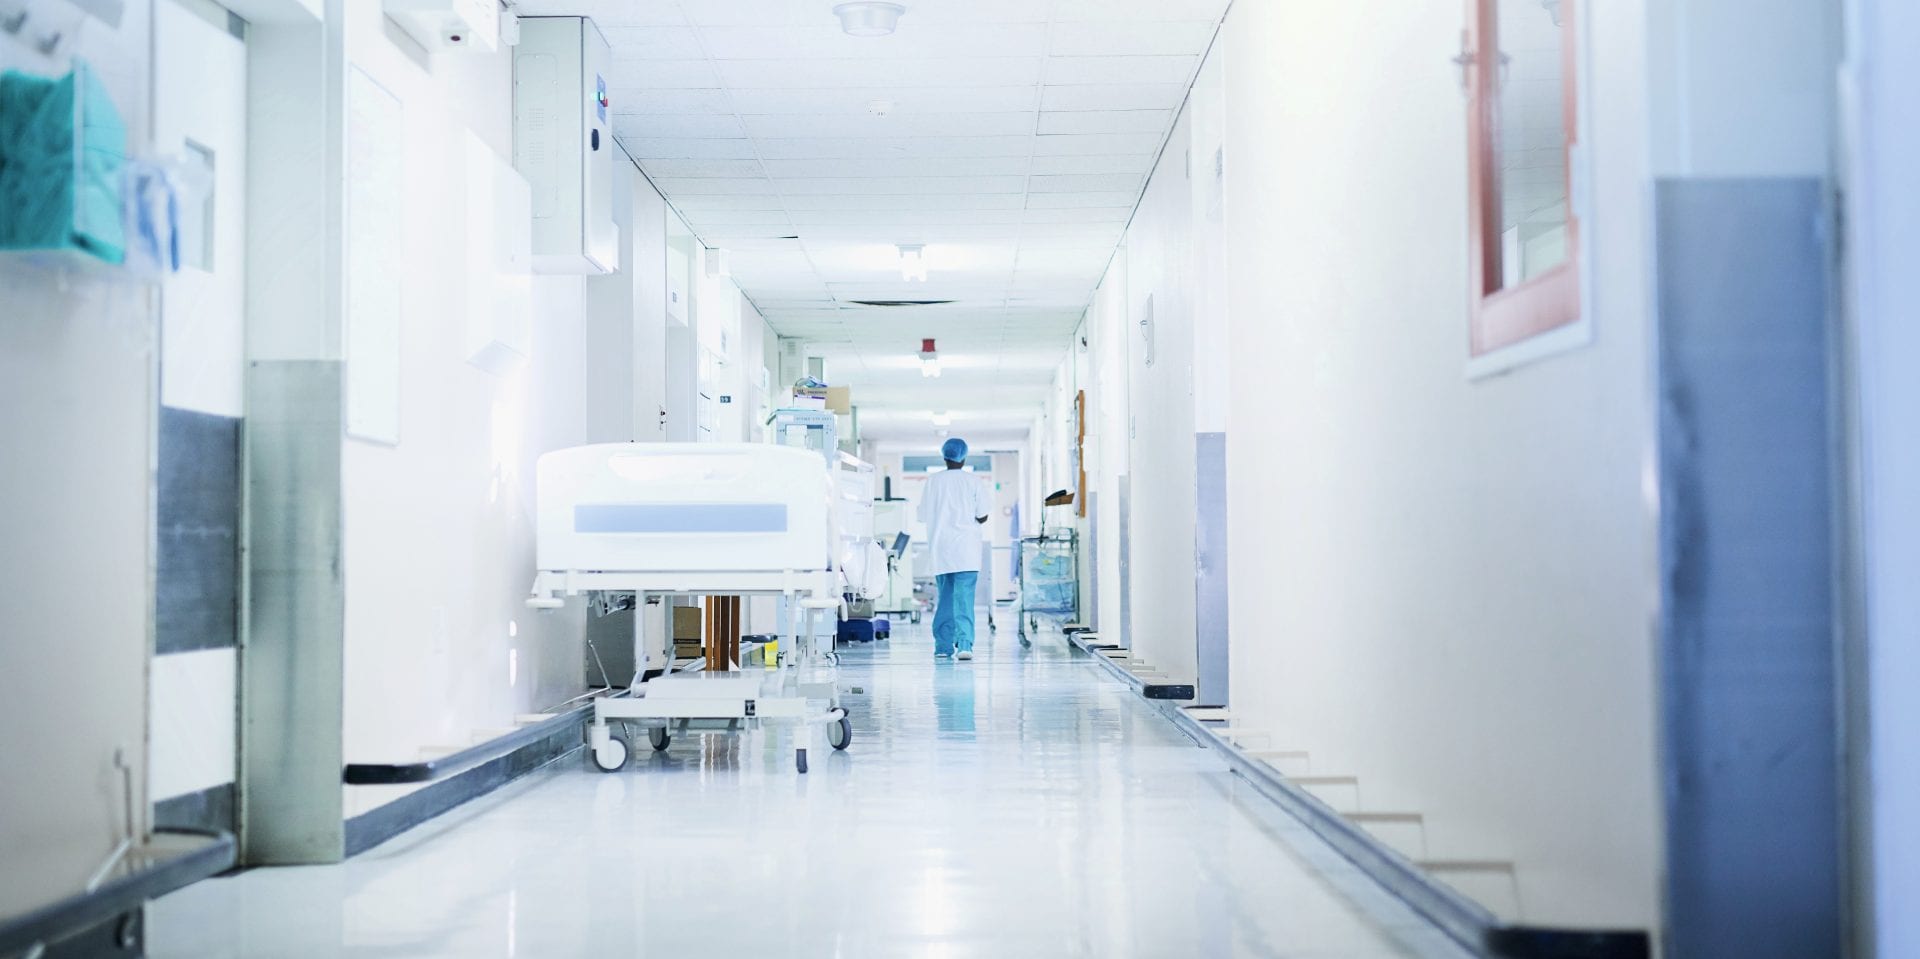 Healthcare is a sector under severe cost pressure, therefore firestop solutions should be easy (and cost-effective) to maintain.